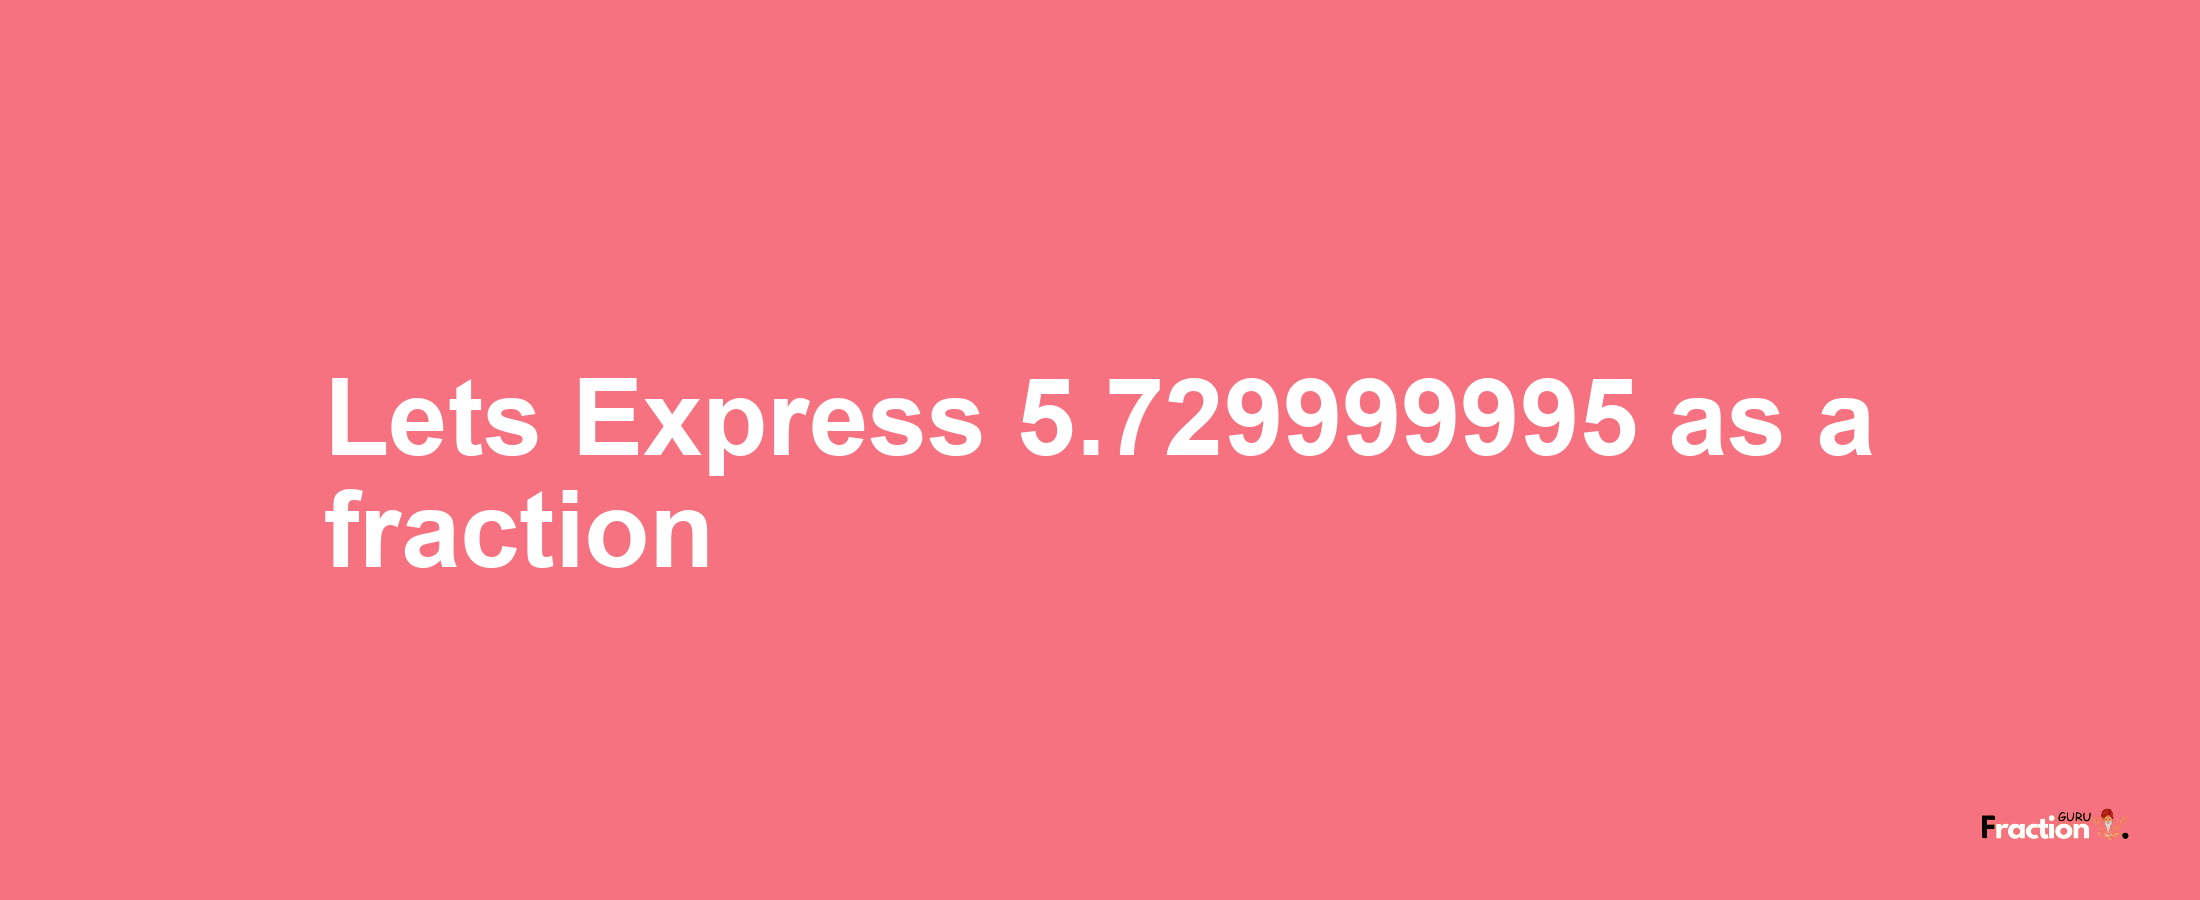 Lets Express 5.729999995 as afraction